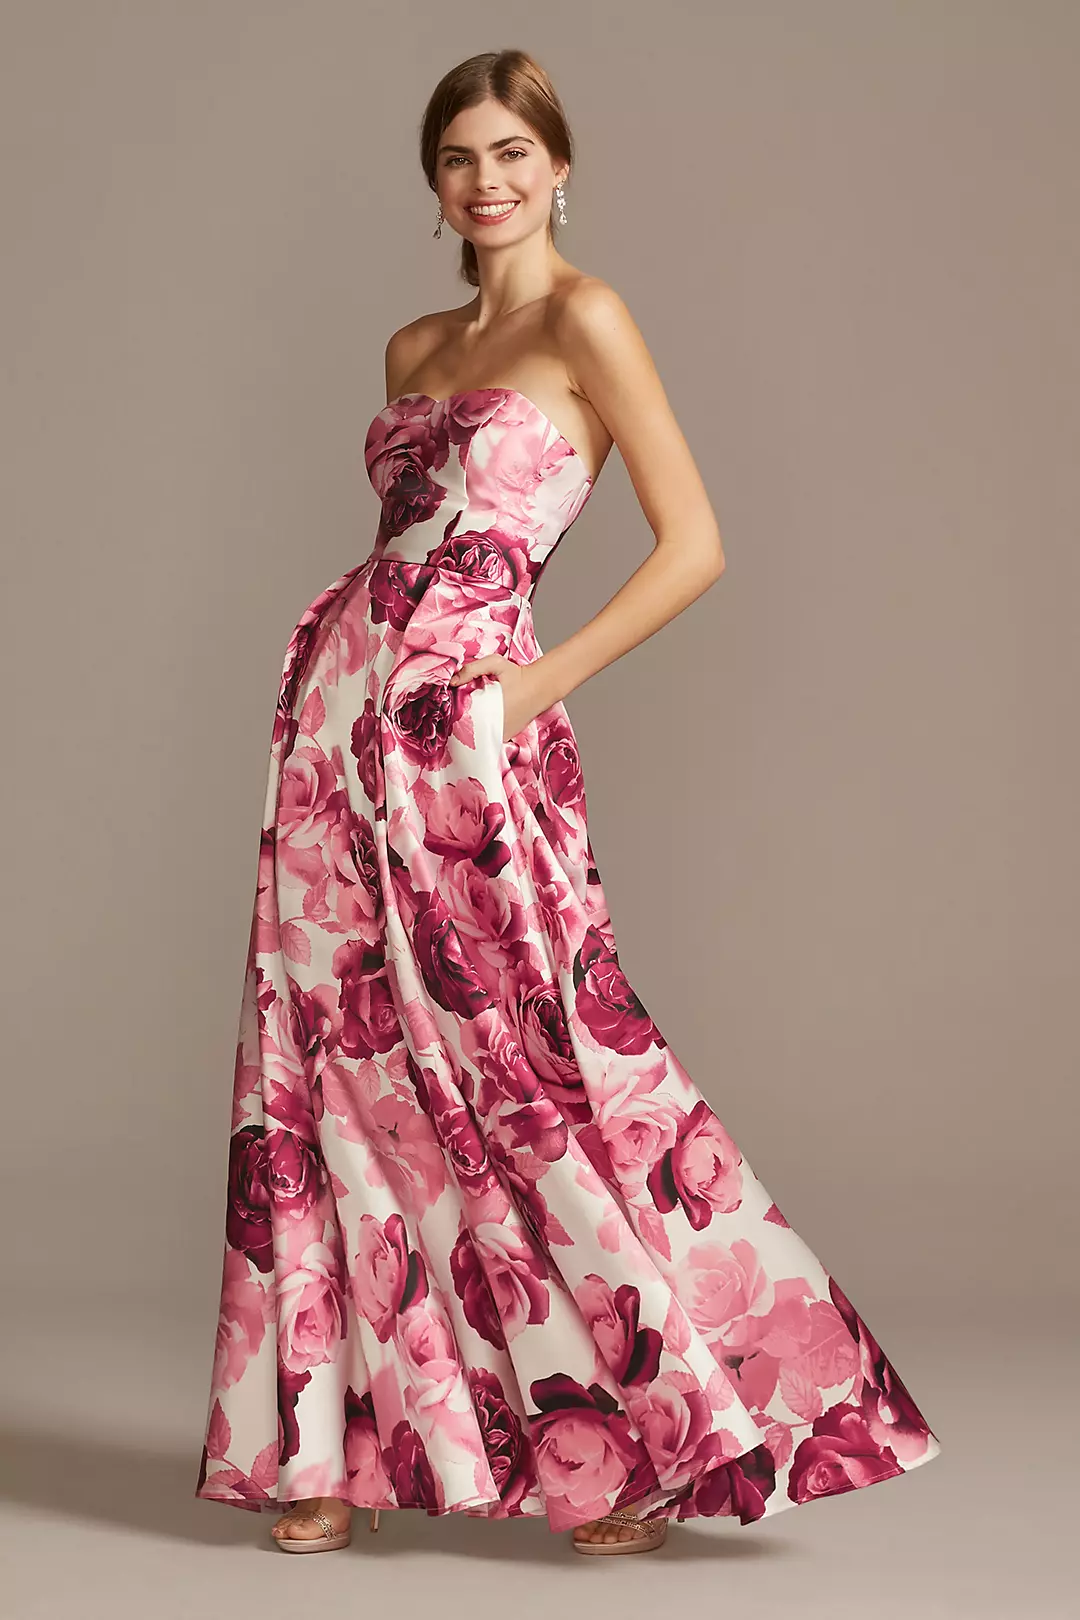 Floral Print Strapless Satin Gown with Pockets Image